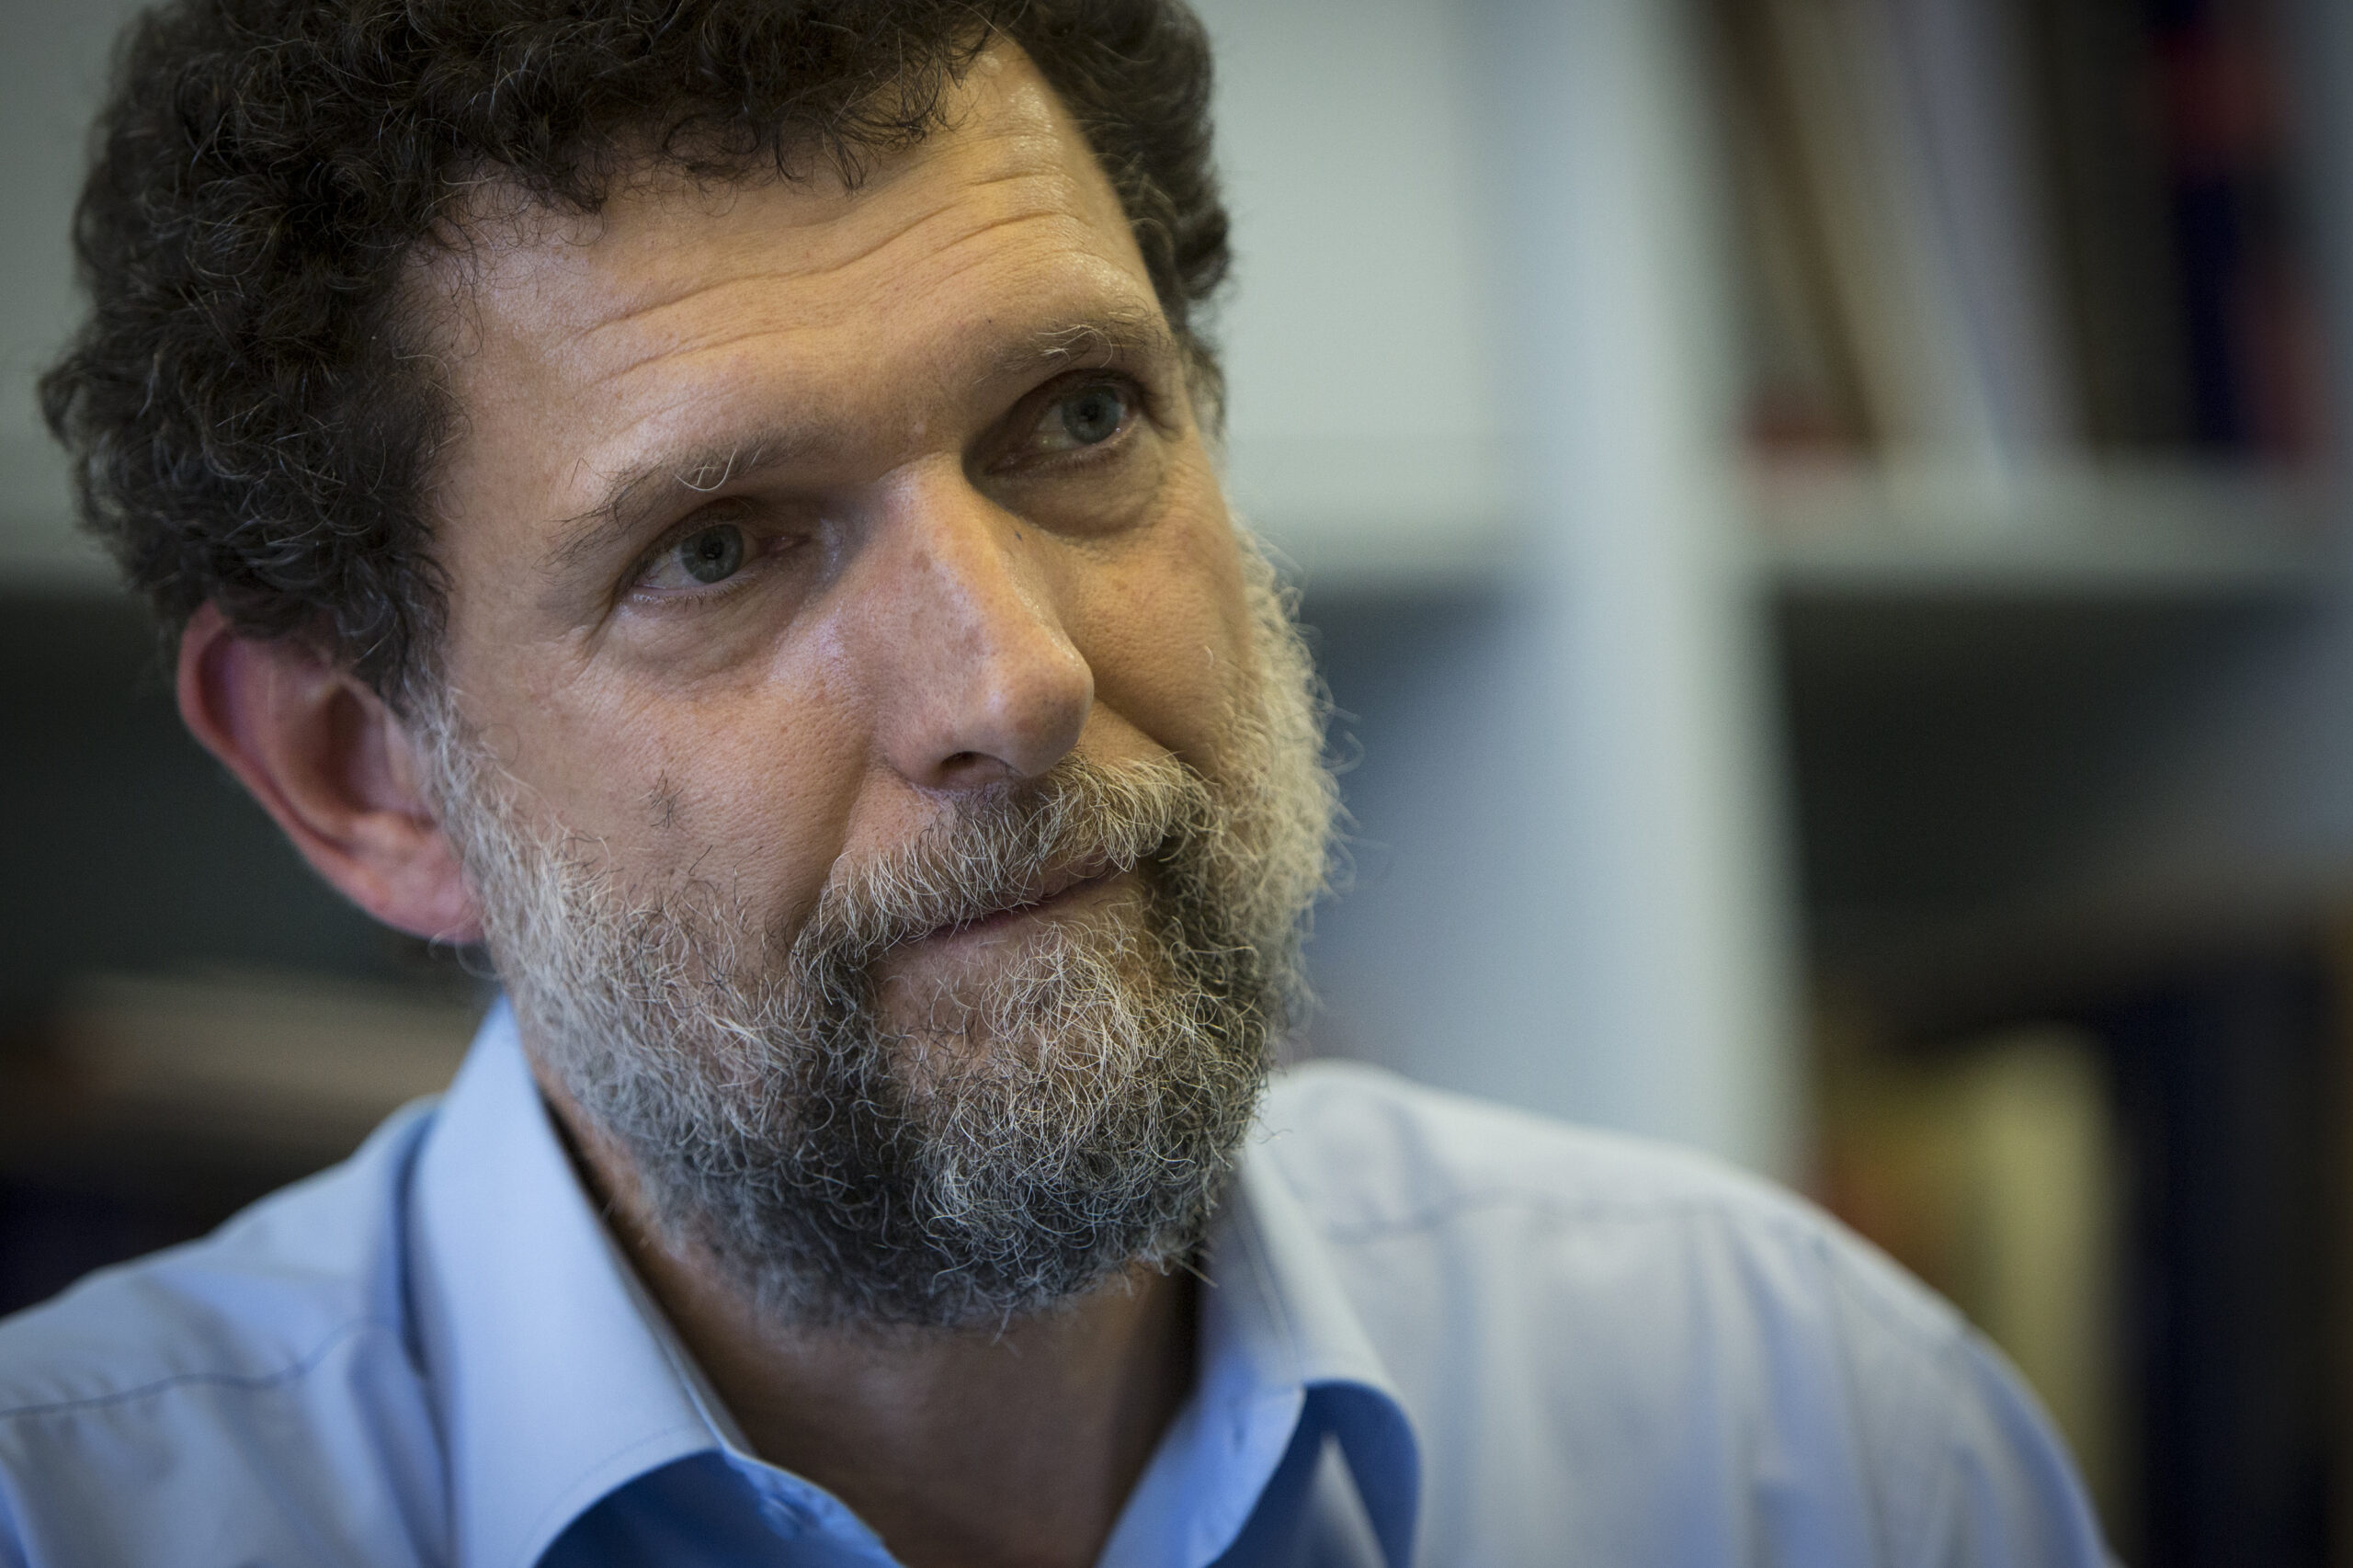 Turkey: Aggravated life sentence for Osman Kavala a ‘devastating blow’ for human rights